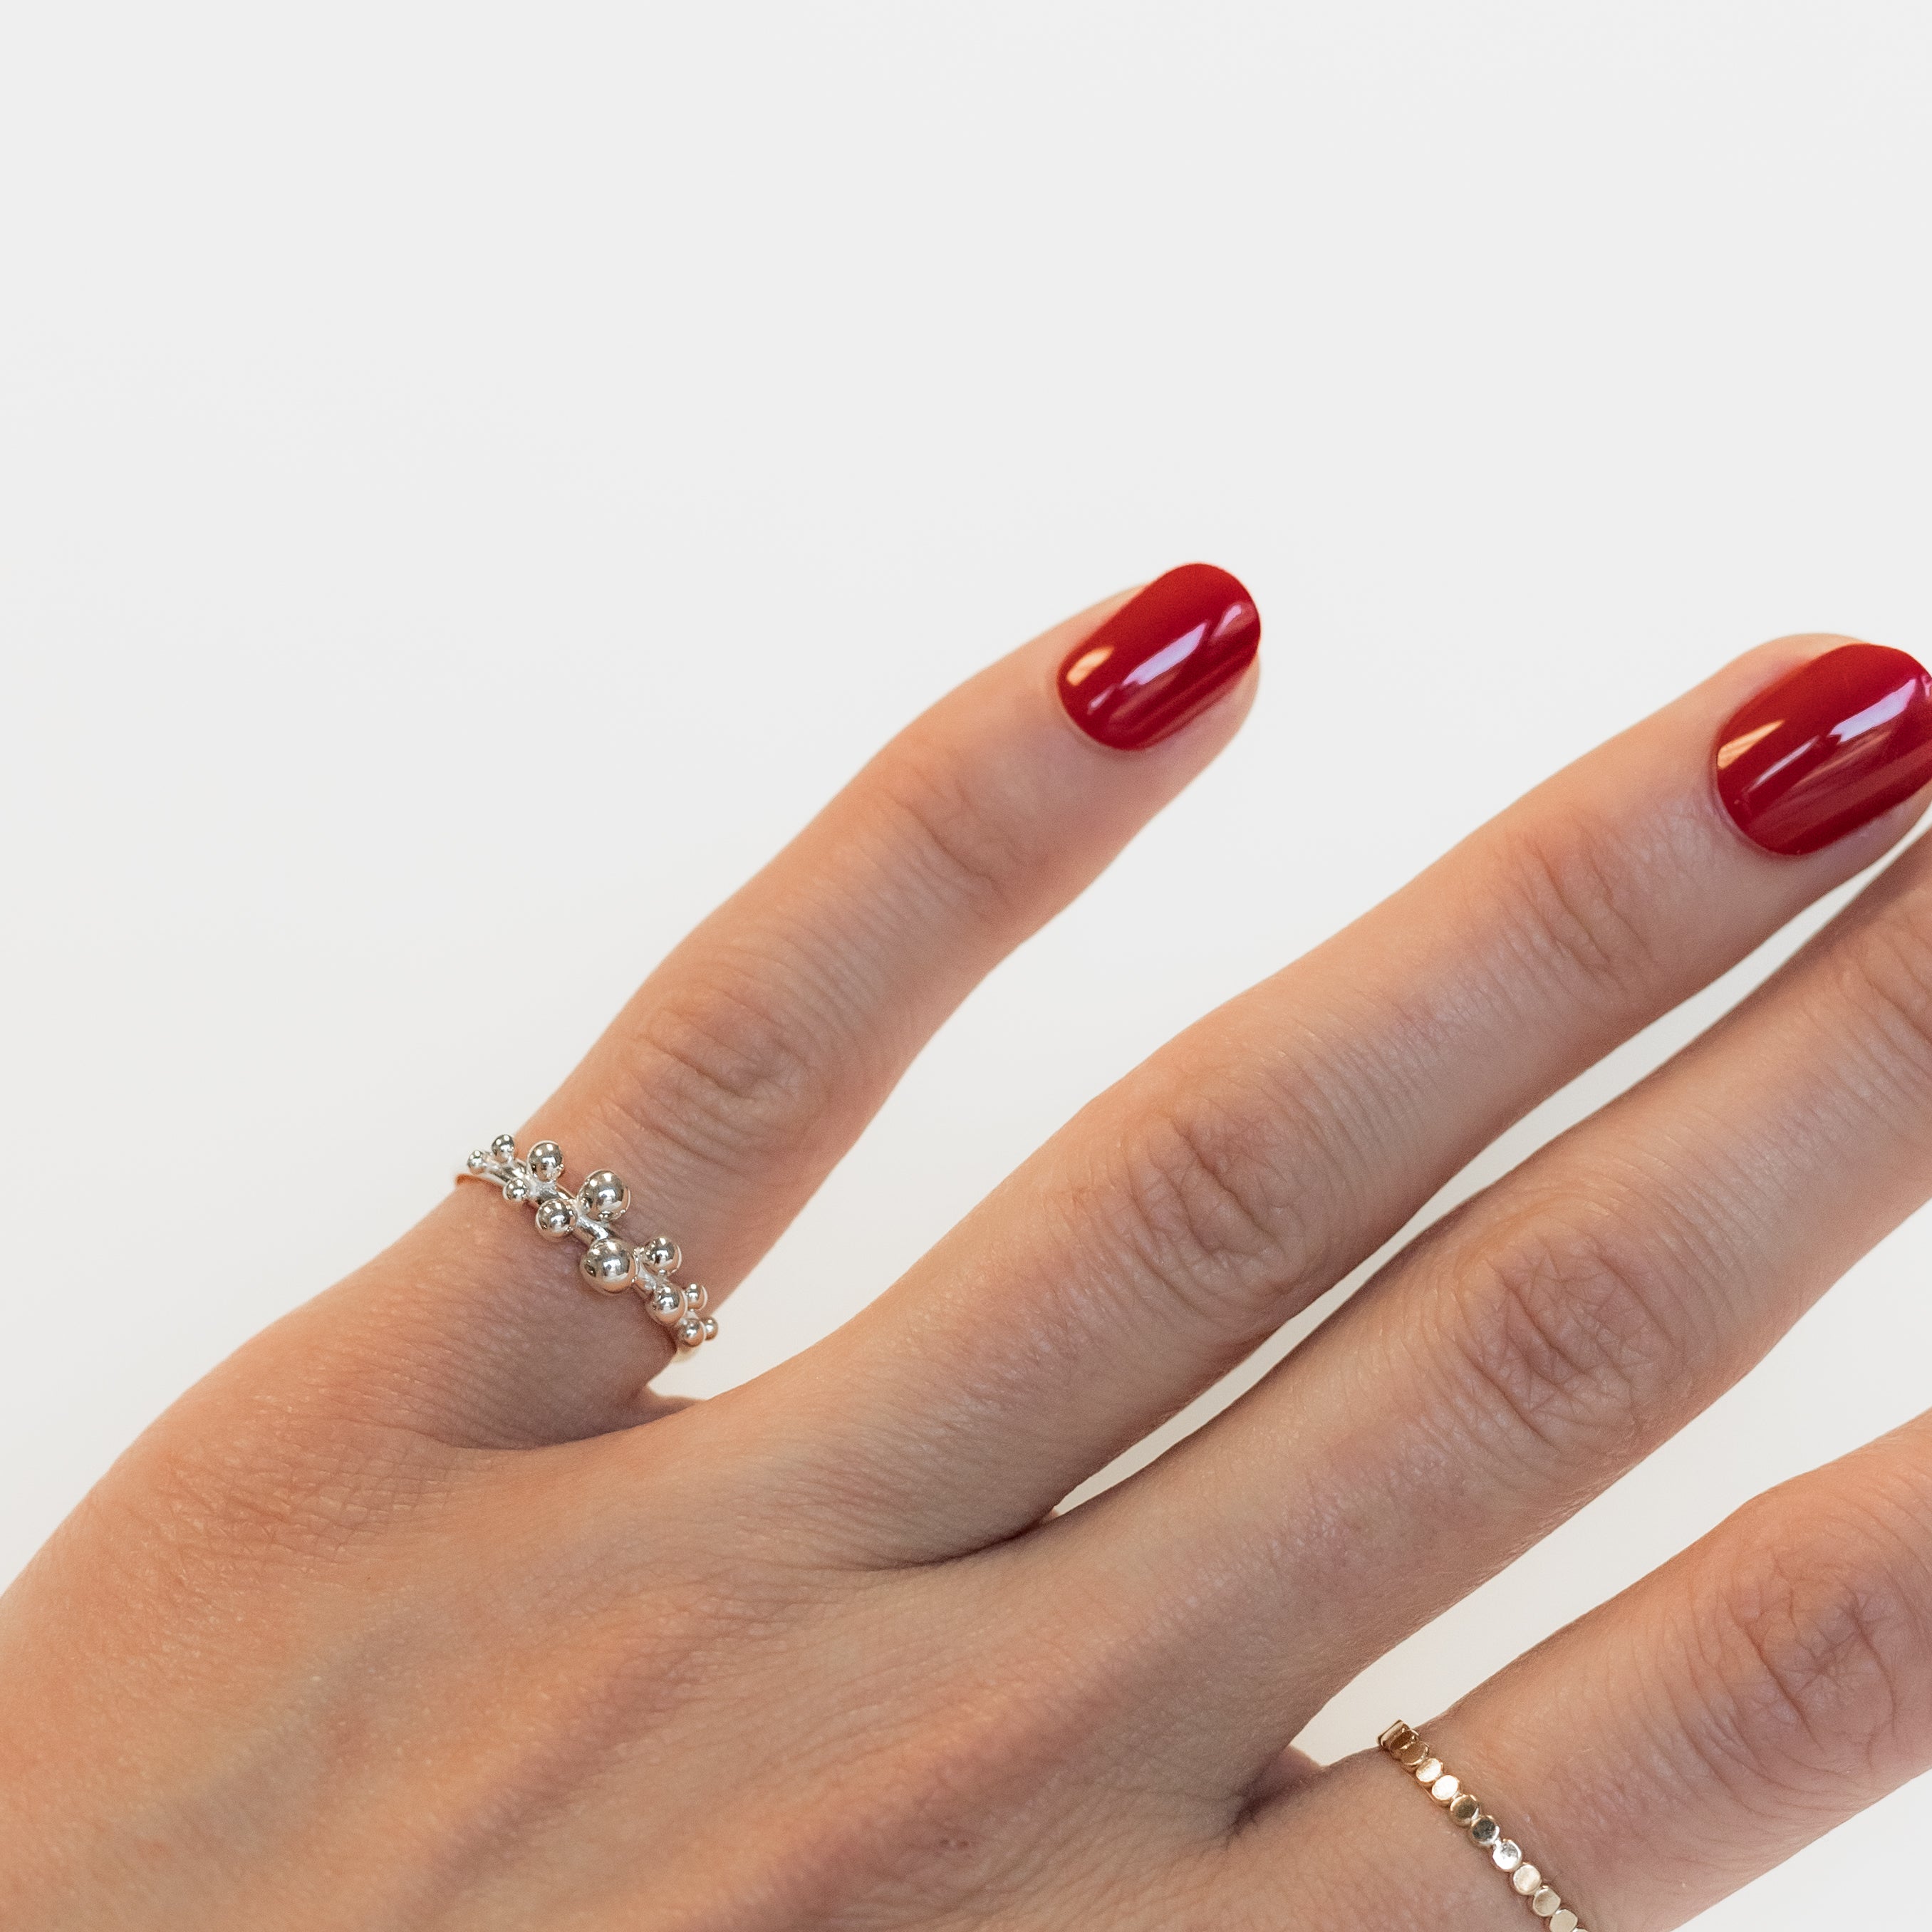 Sterling silver dew drop ring shown on a woman's hand. 